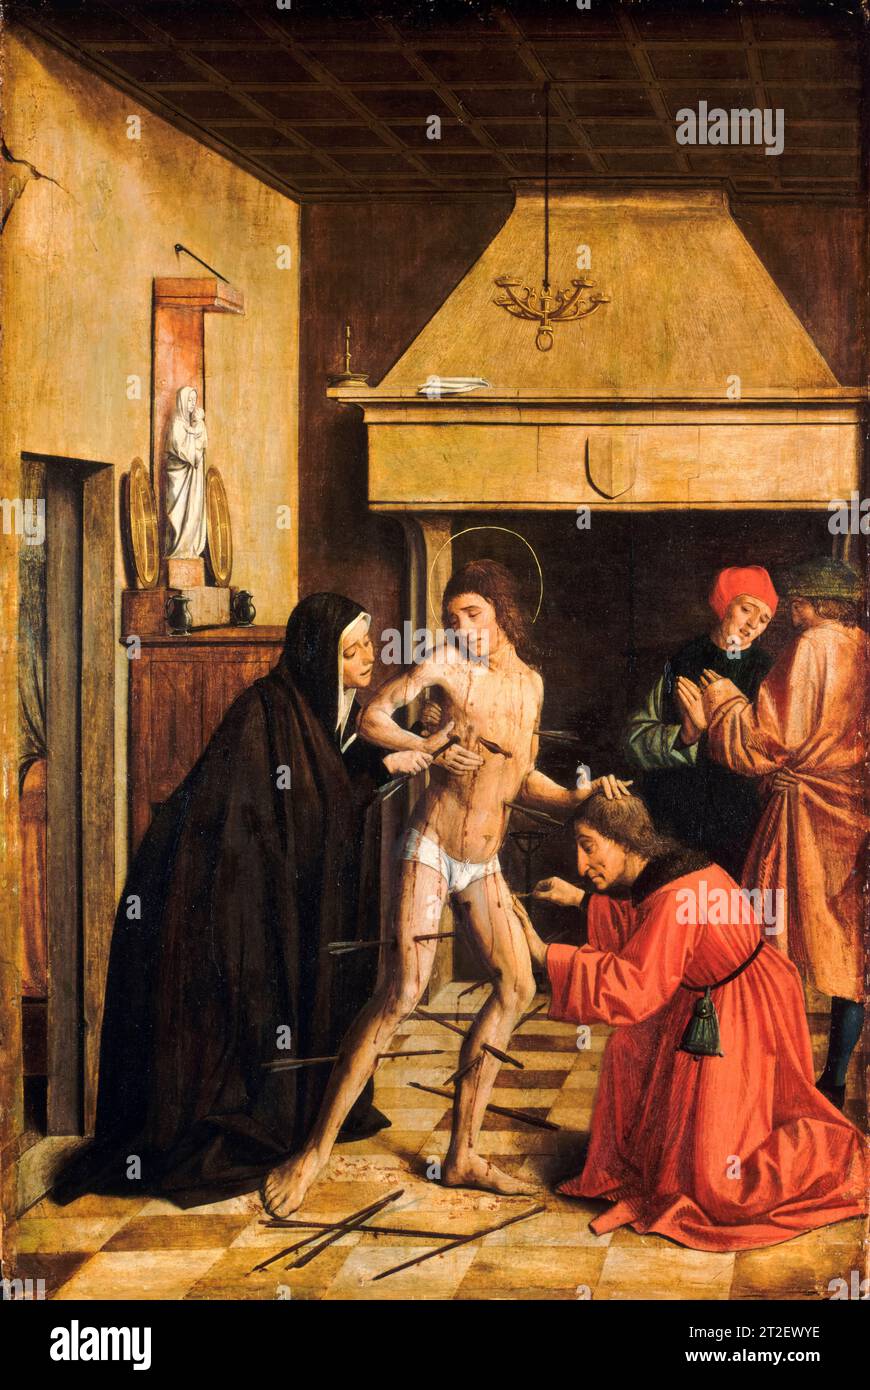 Saint Sebastian cured by (Saint) Irene, painting in oil on panel by Josse Lieferinxe, circa 1497 Stock Photo